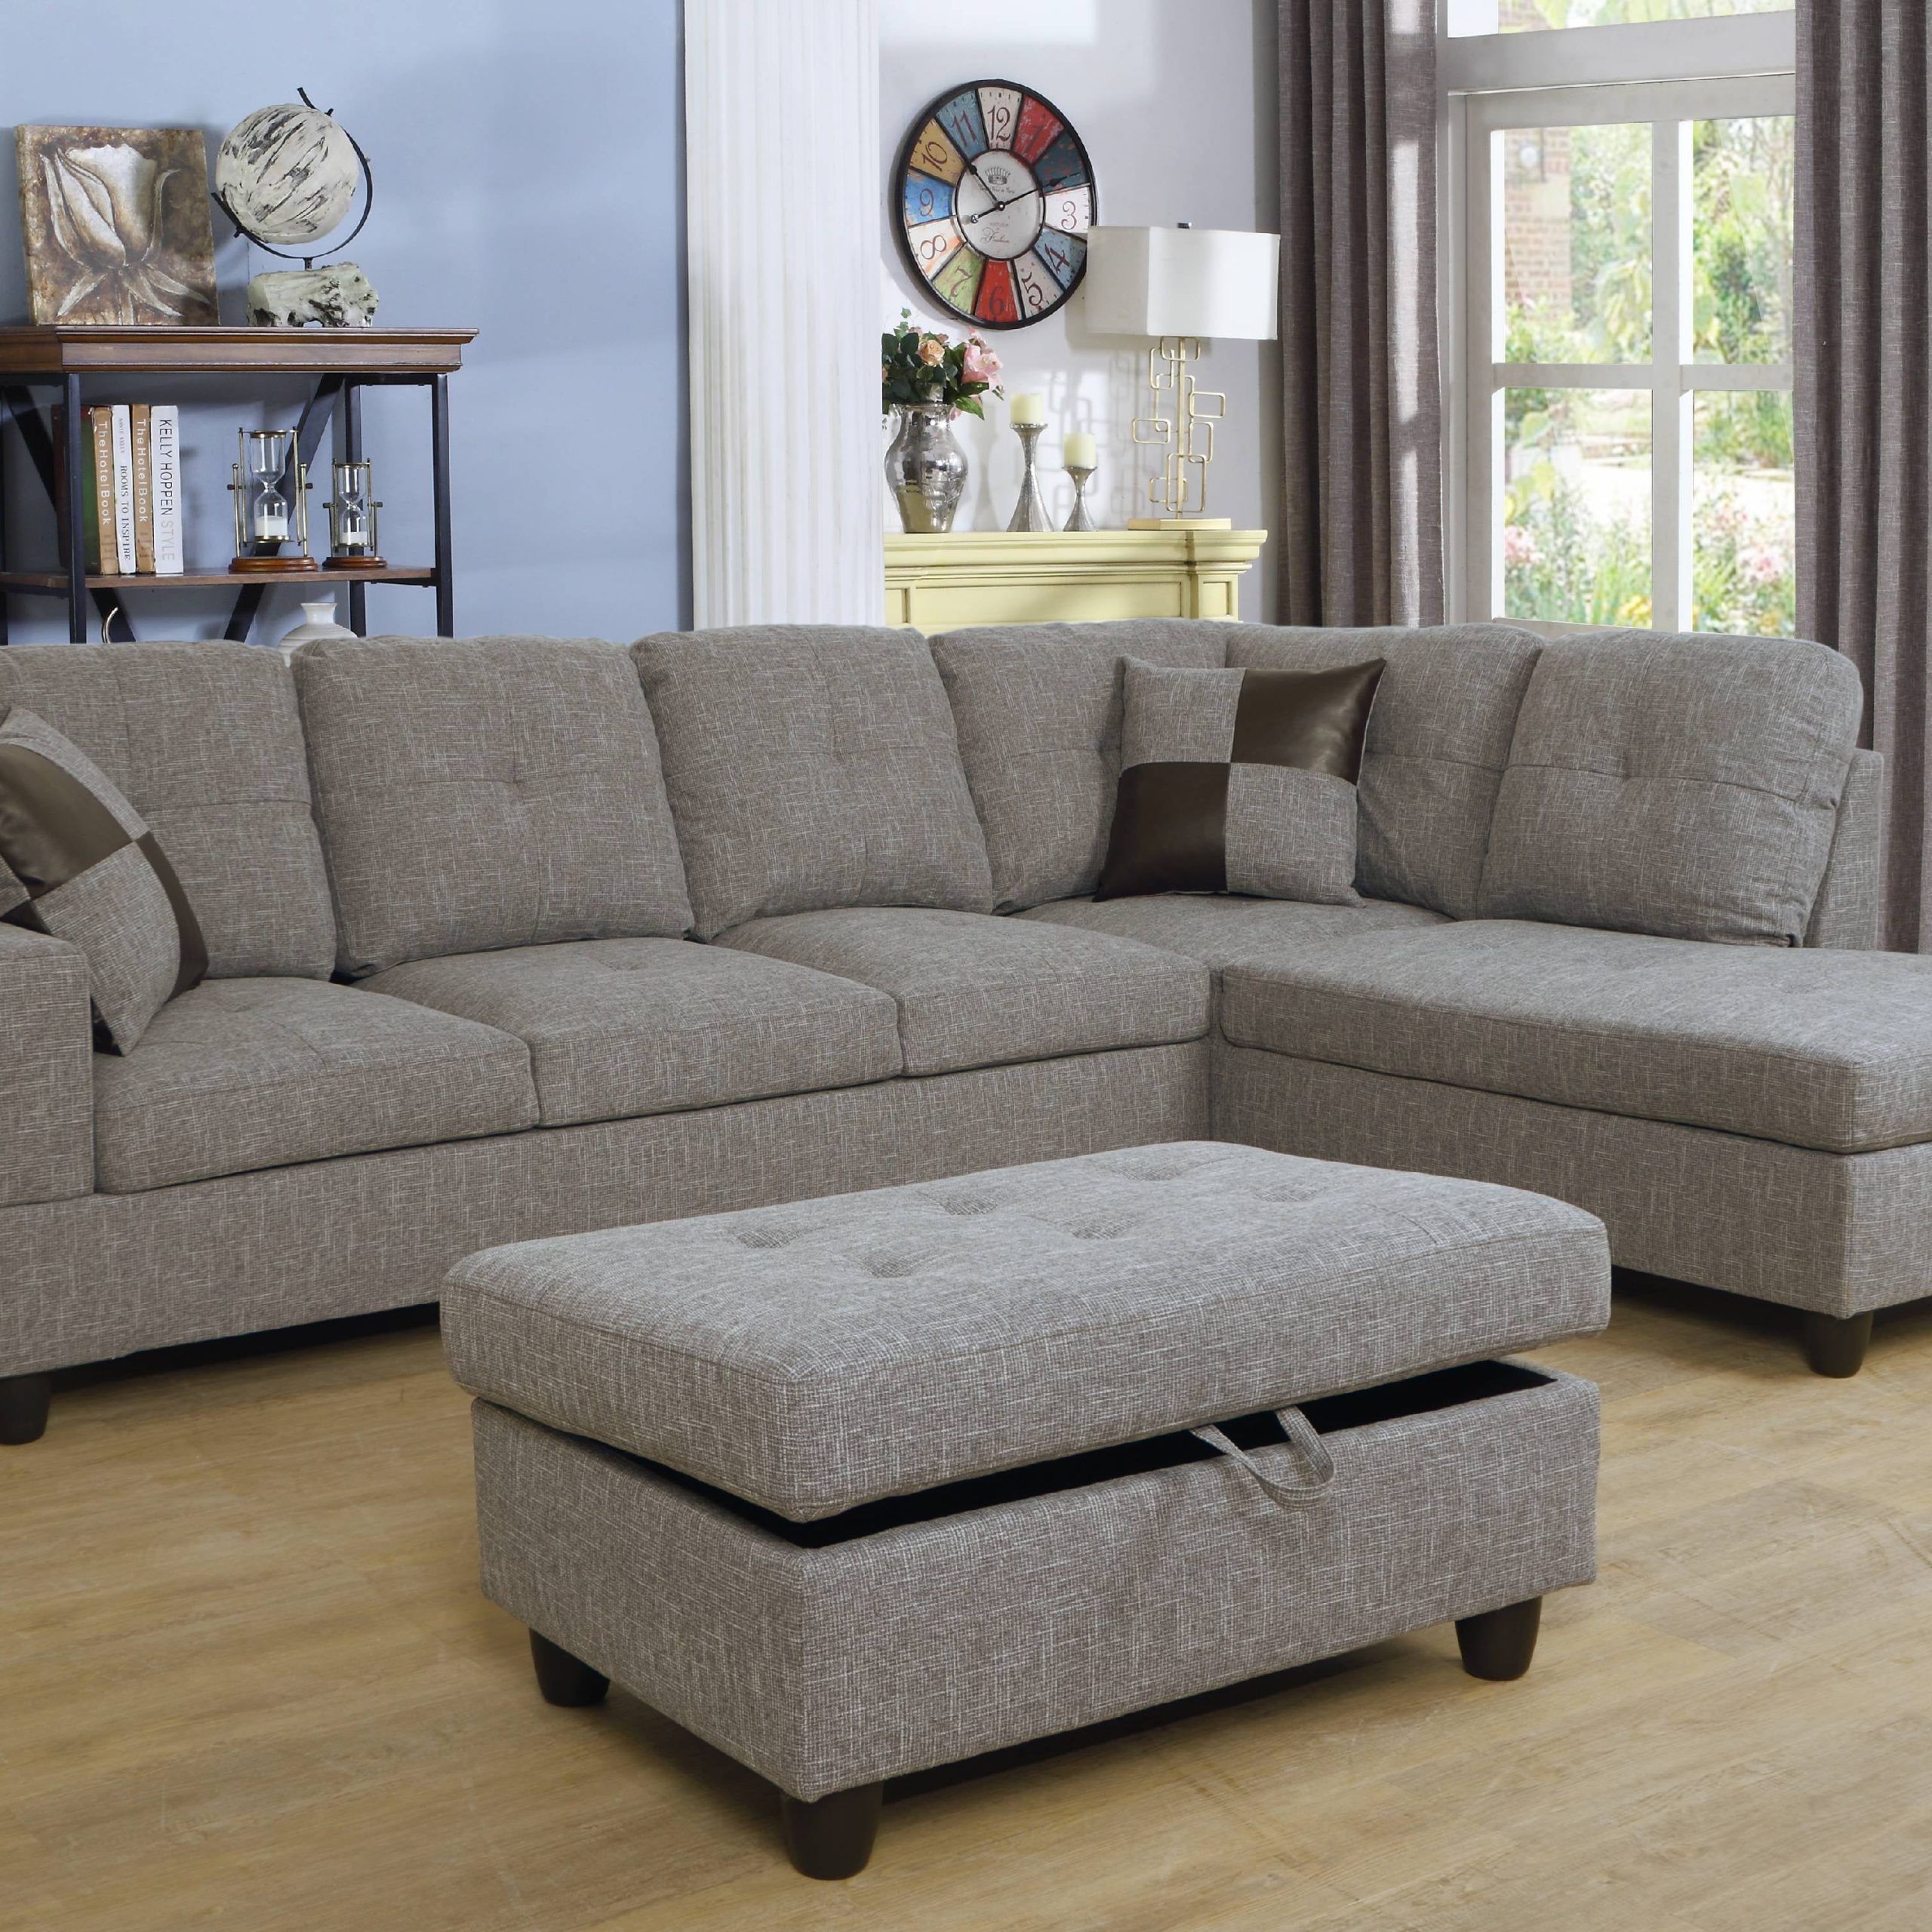 Ashey Furniture – L Shape Sectional Sofa Set With Storage Ottoman Throughout Sofas With Ottomans (View 10 of 20)